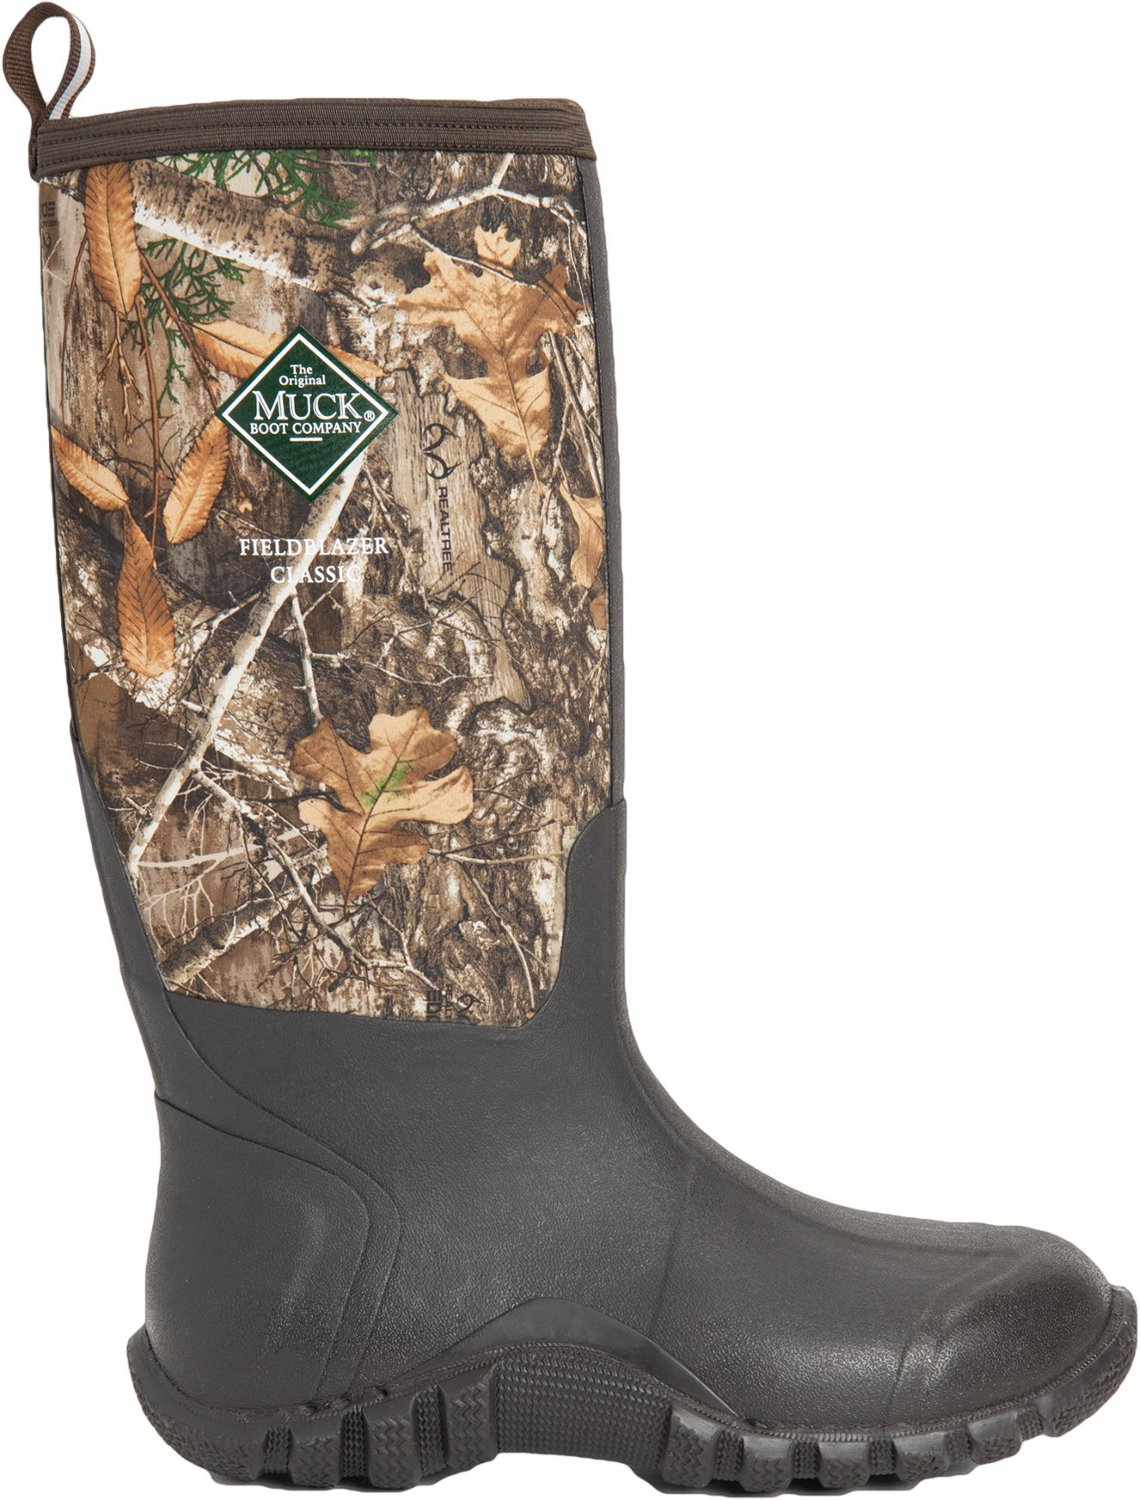 Muck Boot Adults' Field Blazer Insulated Waterproof Hunting Boots | Academy